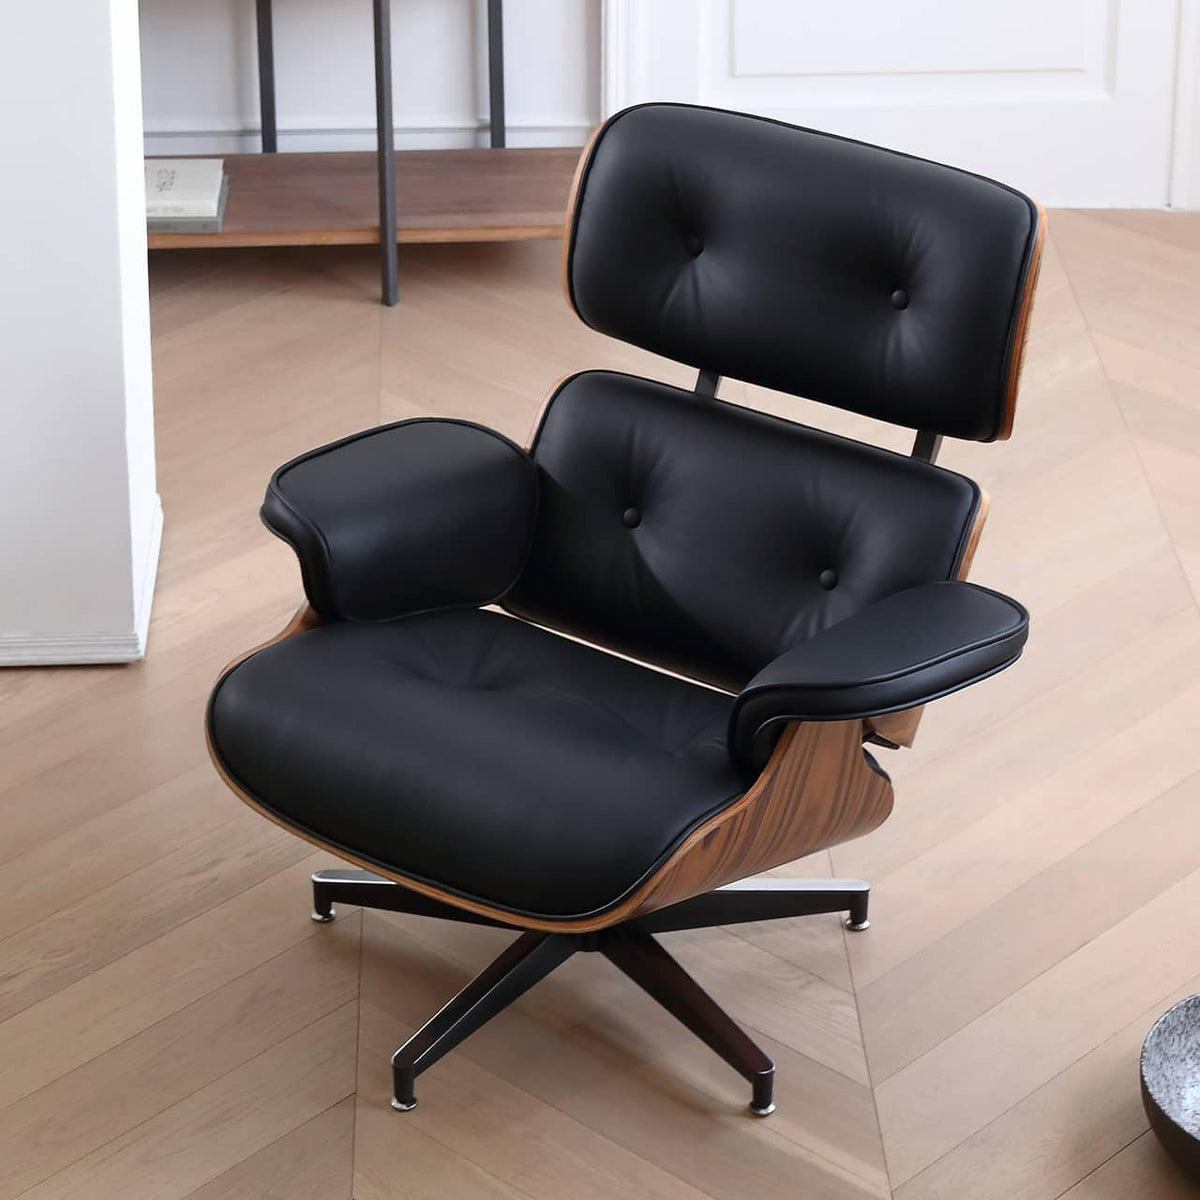 Luxurious Black Leather Executive Chair with Multi-Layer Support my-383